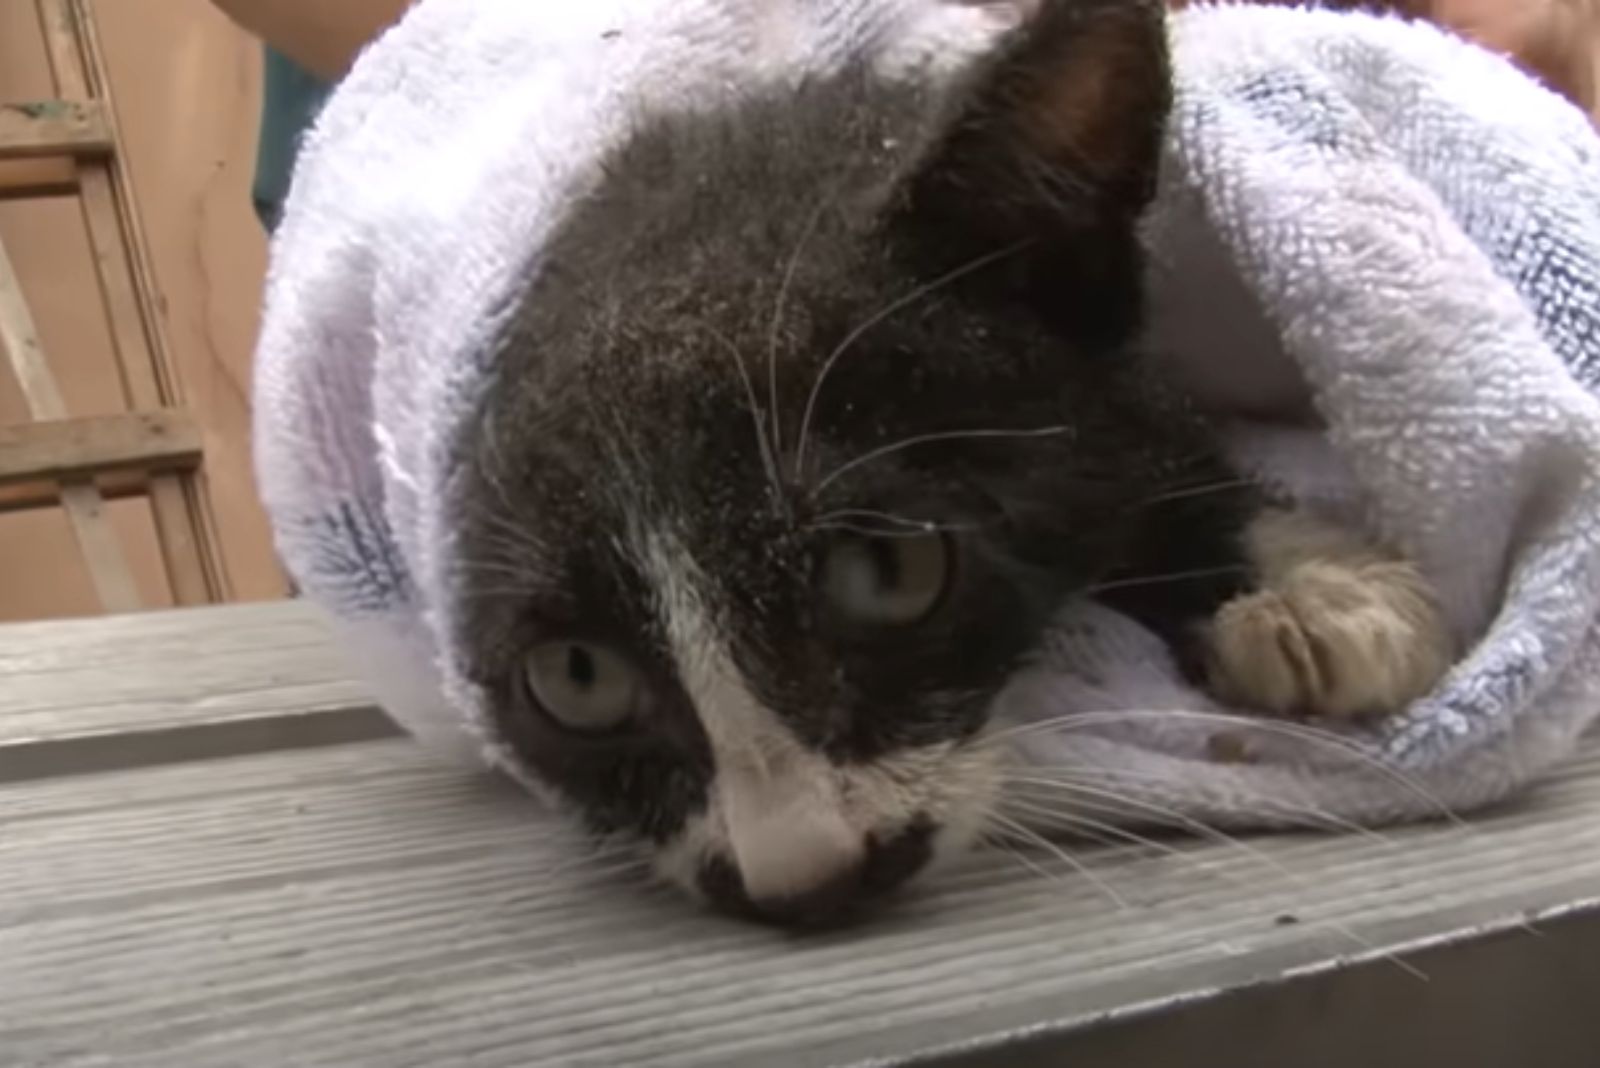 kitty in a towel